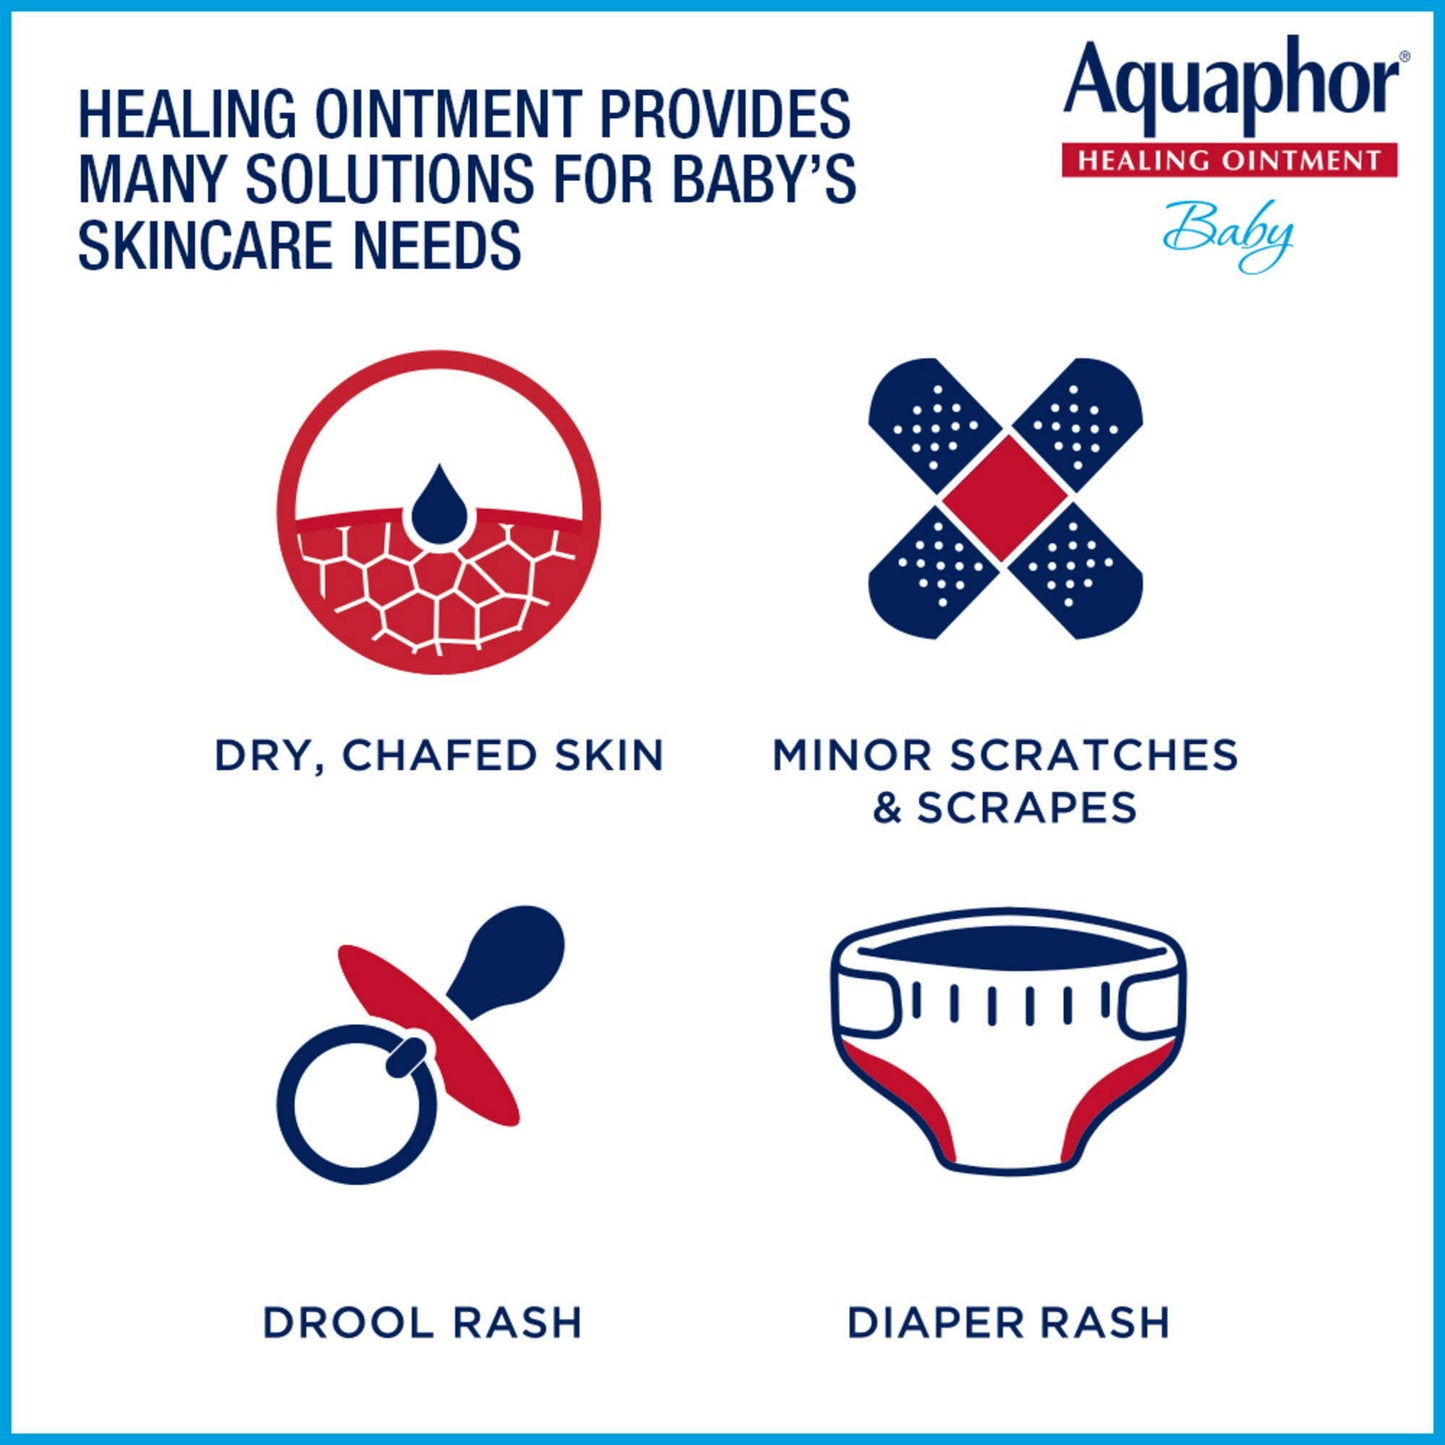 Aquaphor Baby Healing Ointment, Baby Skin Care and Diaper Rash, On-the-go